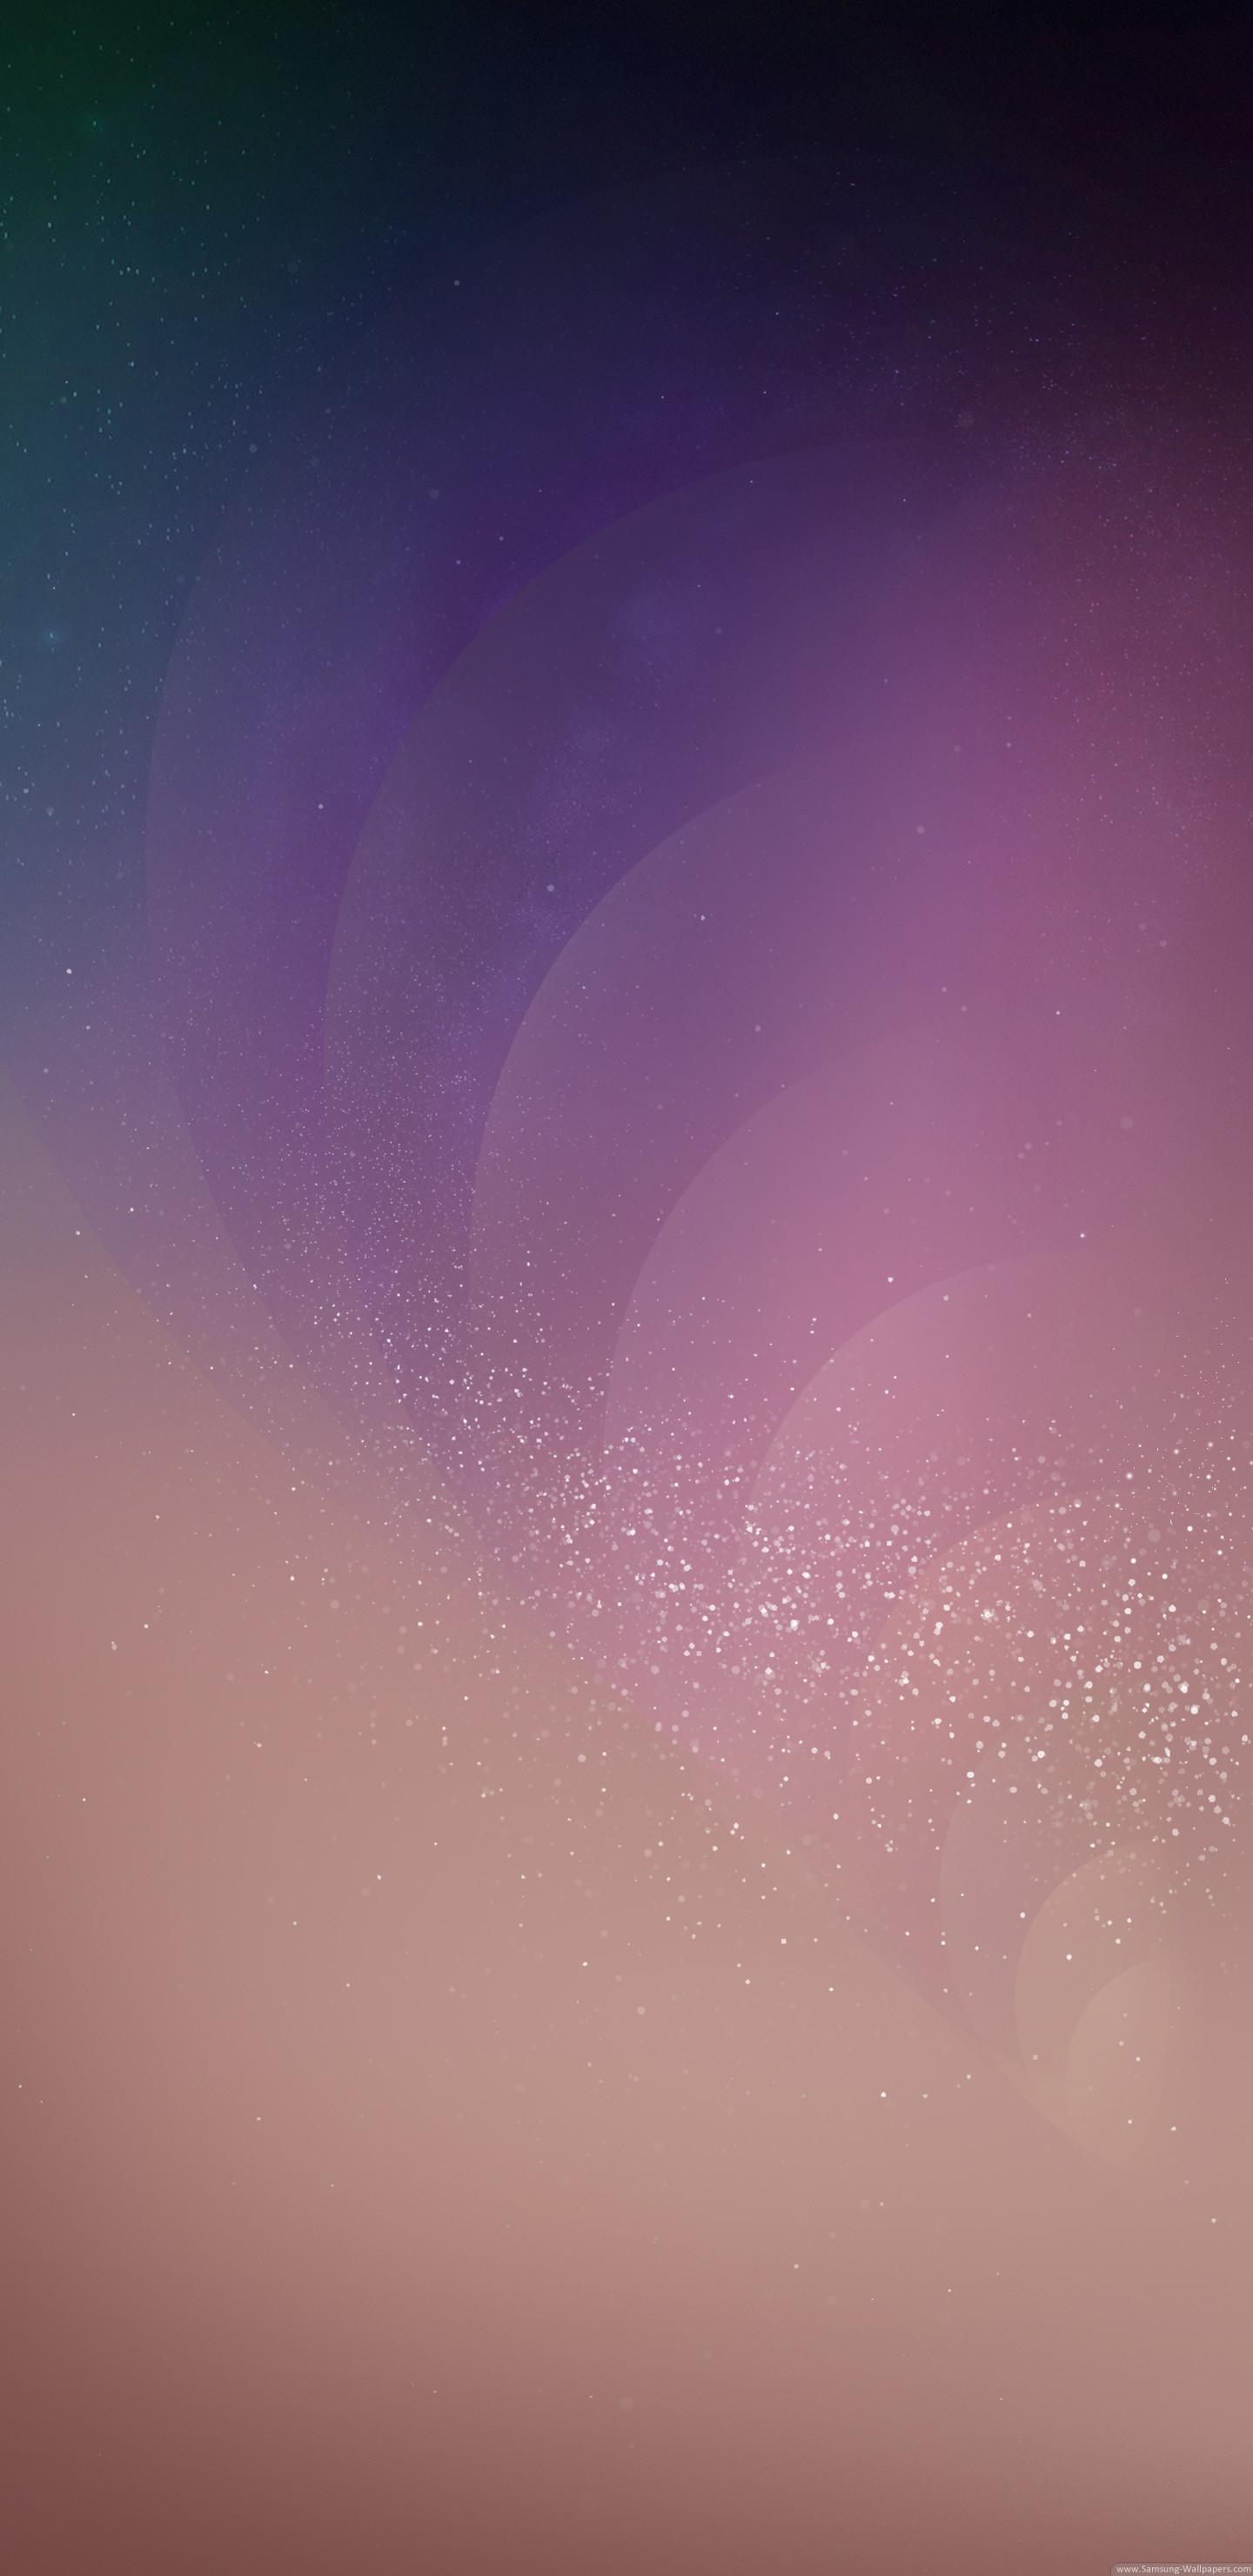 Full HD Wallpapers for Galaxy S3